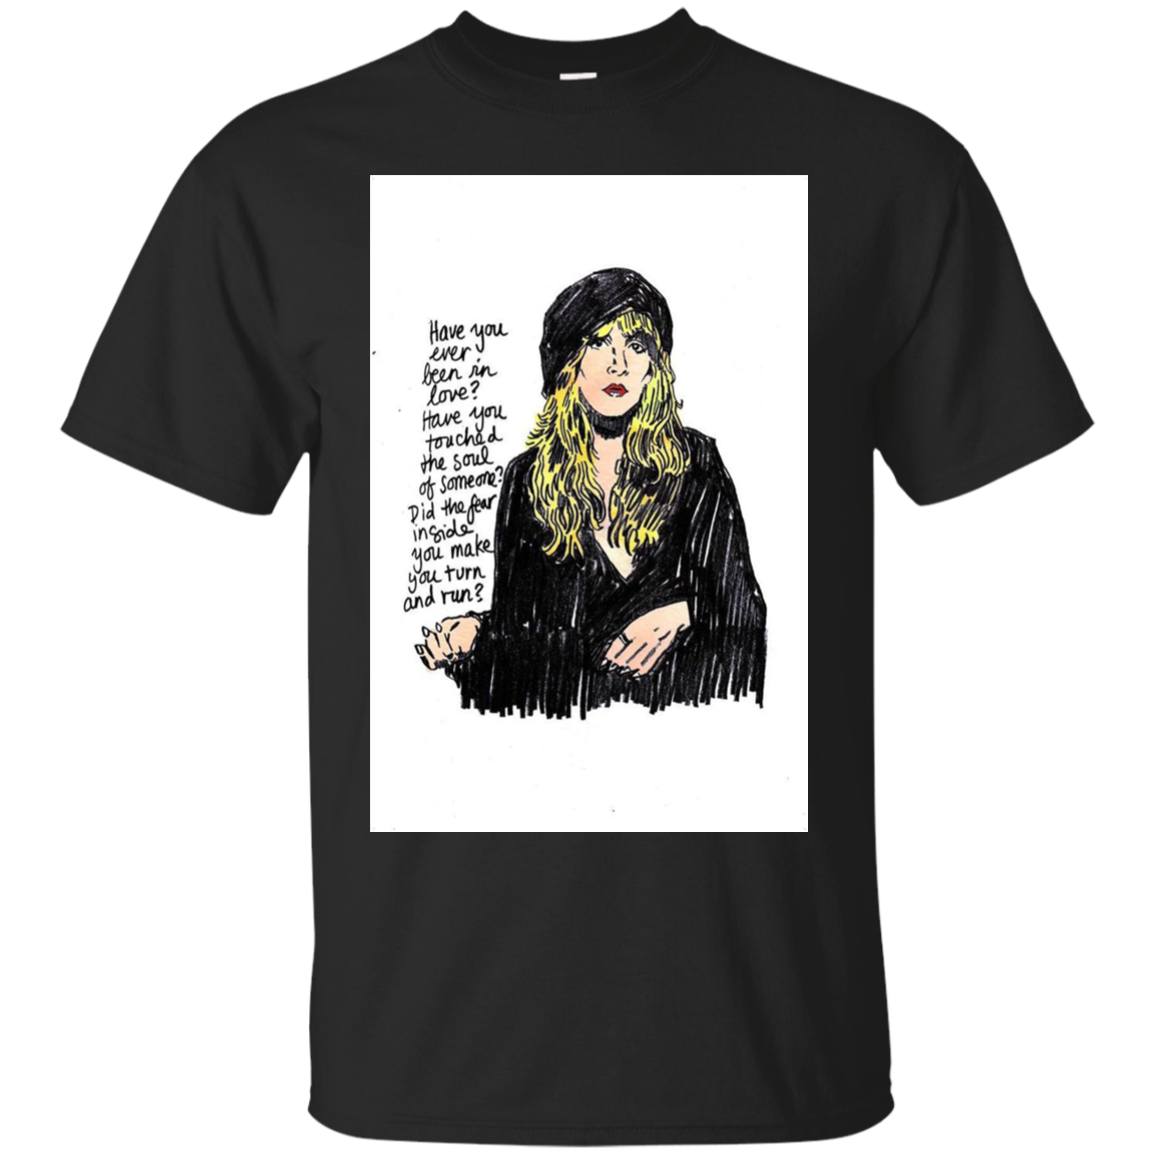 Stevie Nicks Shirts Have You Ever Been In Love Touched The Soul - Amyna